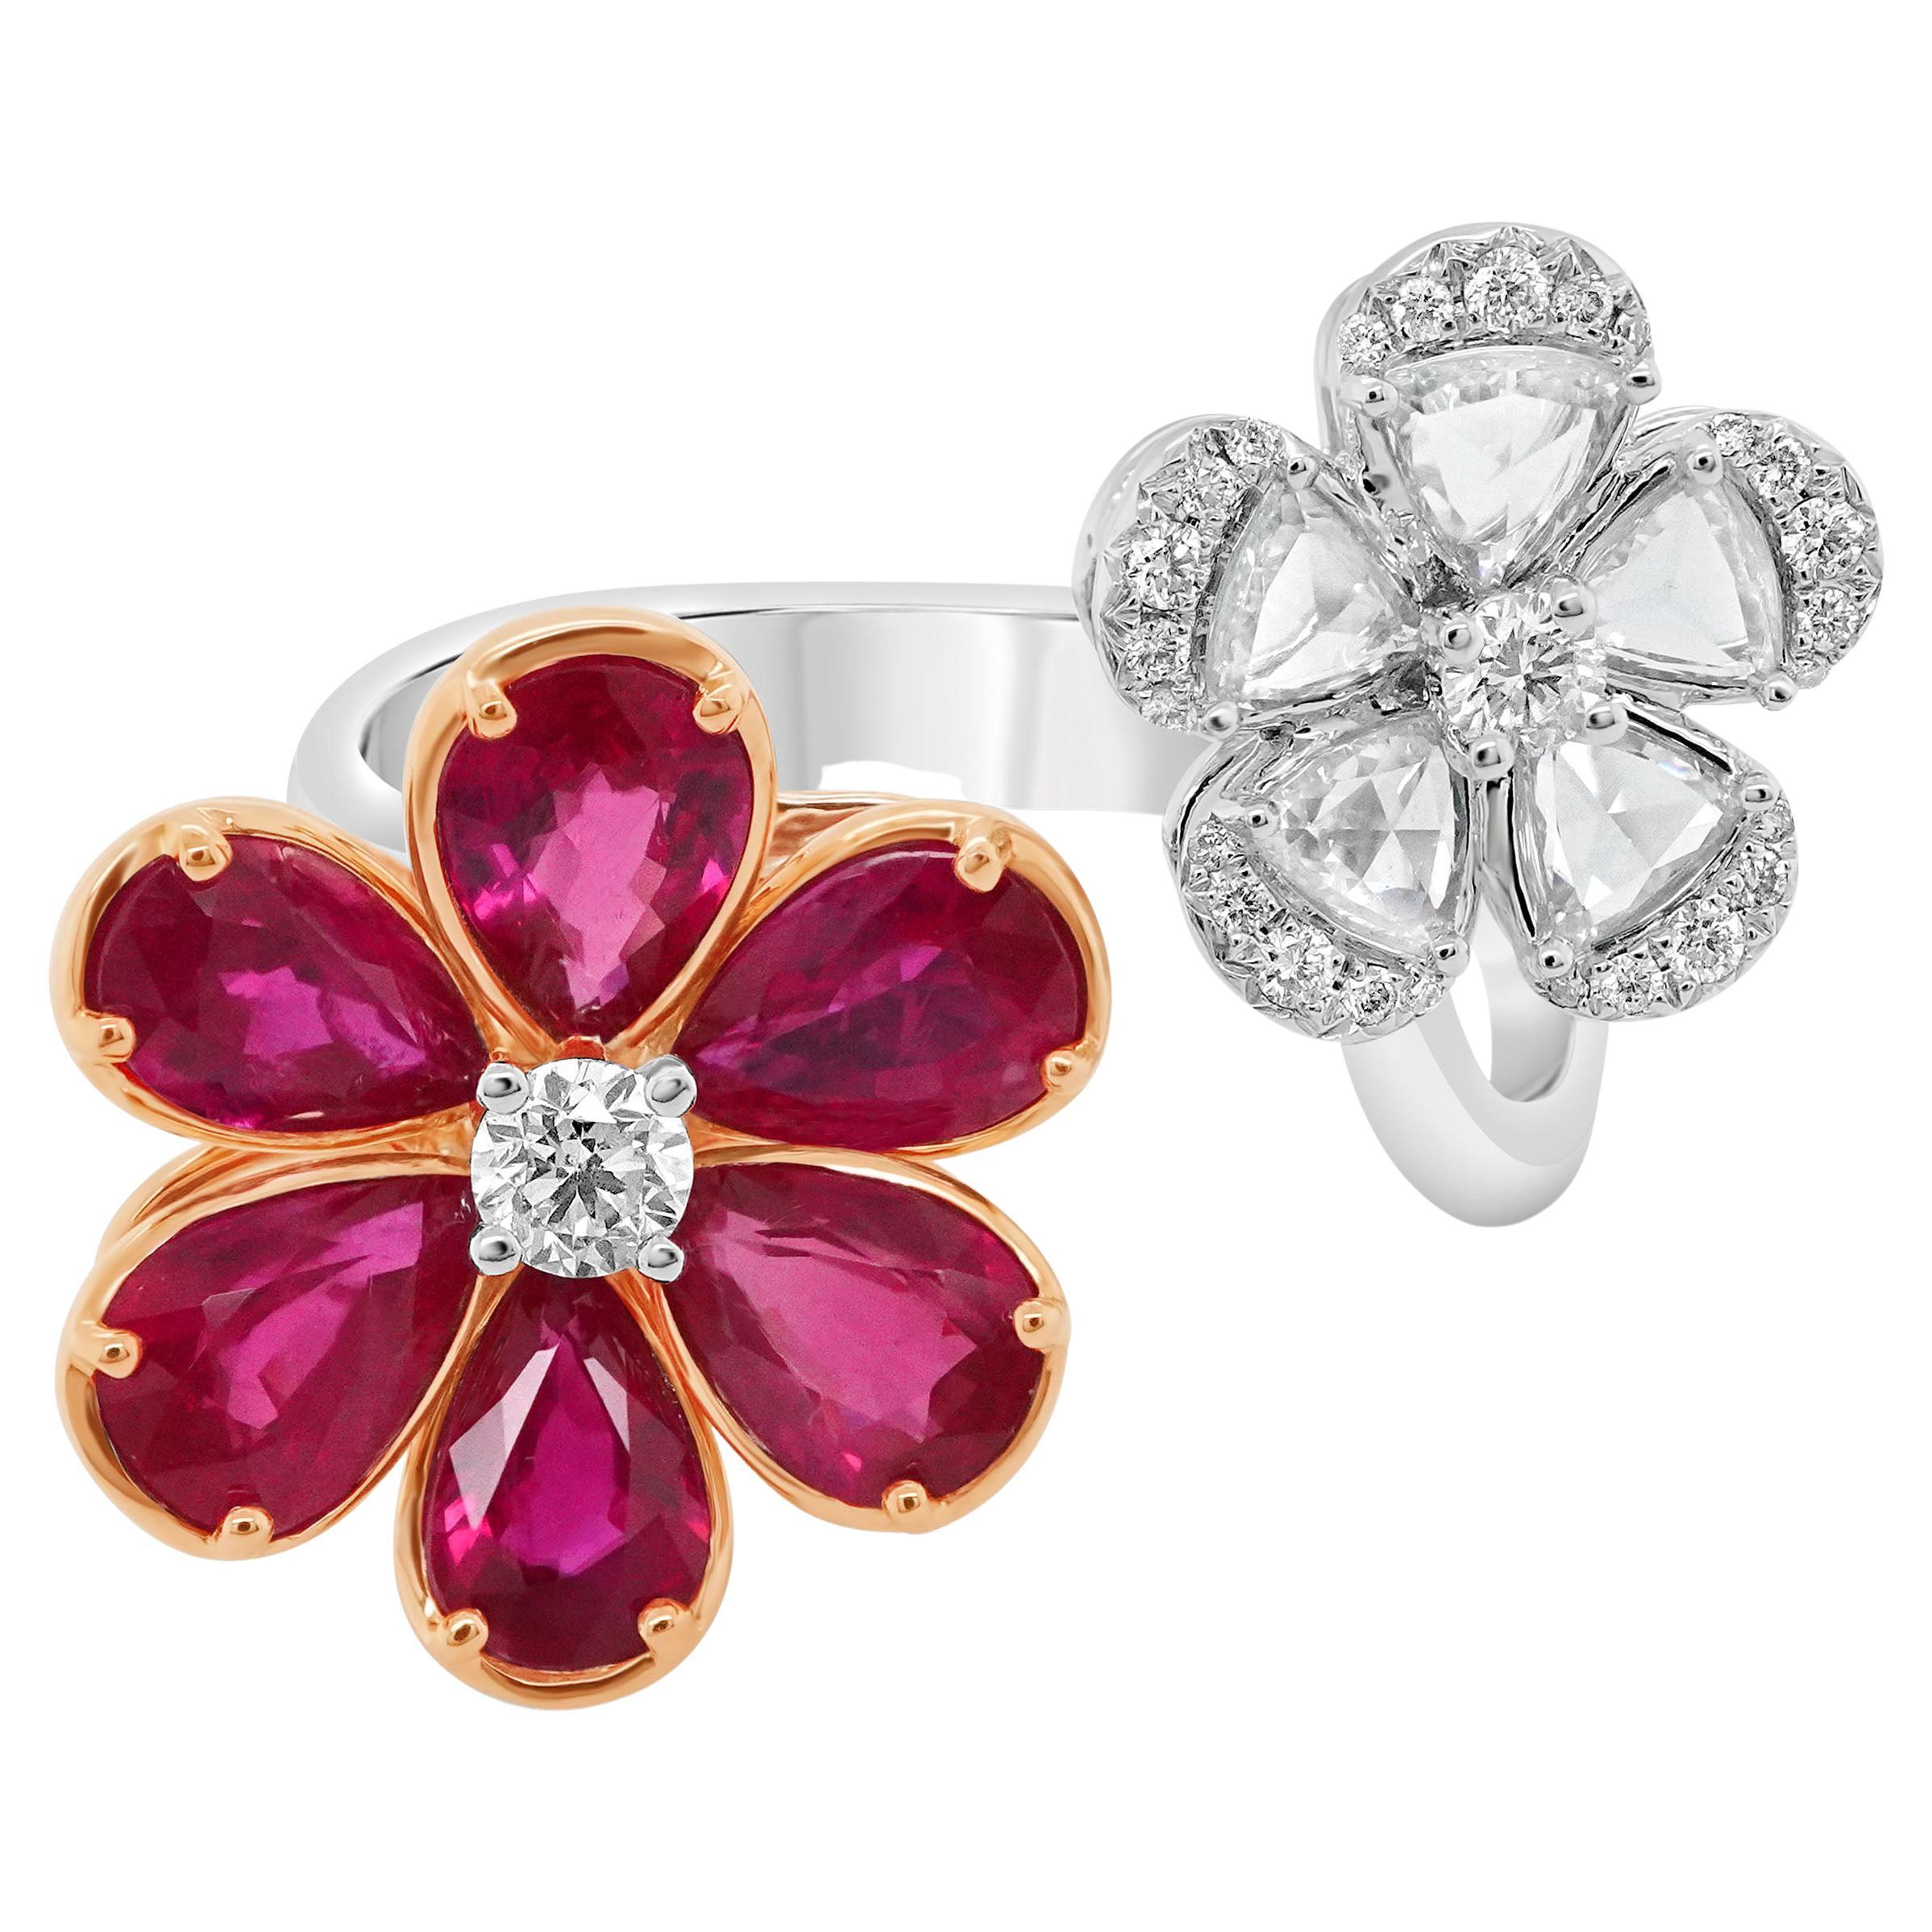 Certified 3.19 Carat Vivid Red Ruby & Diamond Petal Cocktail Ring 18K For Sale